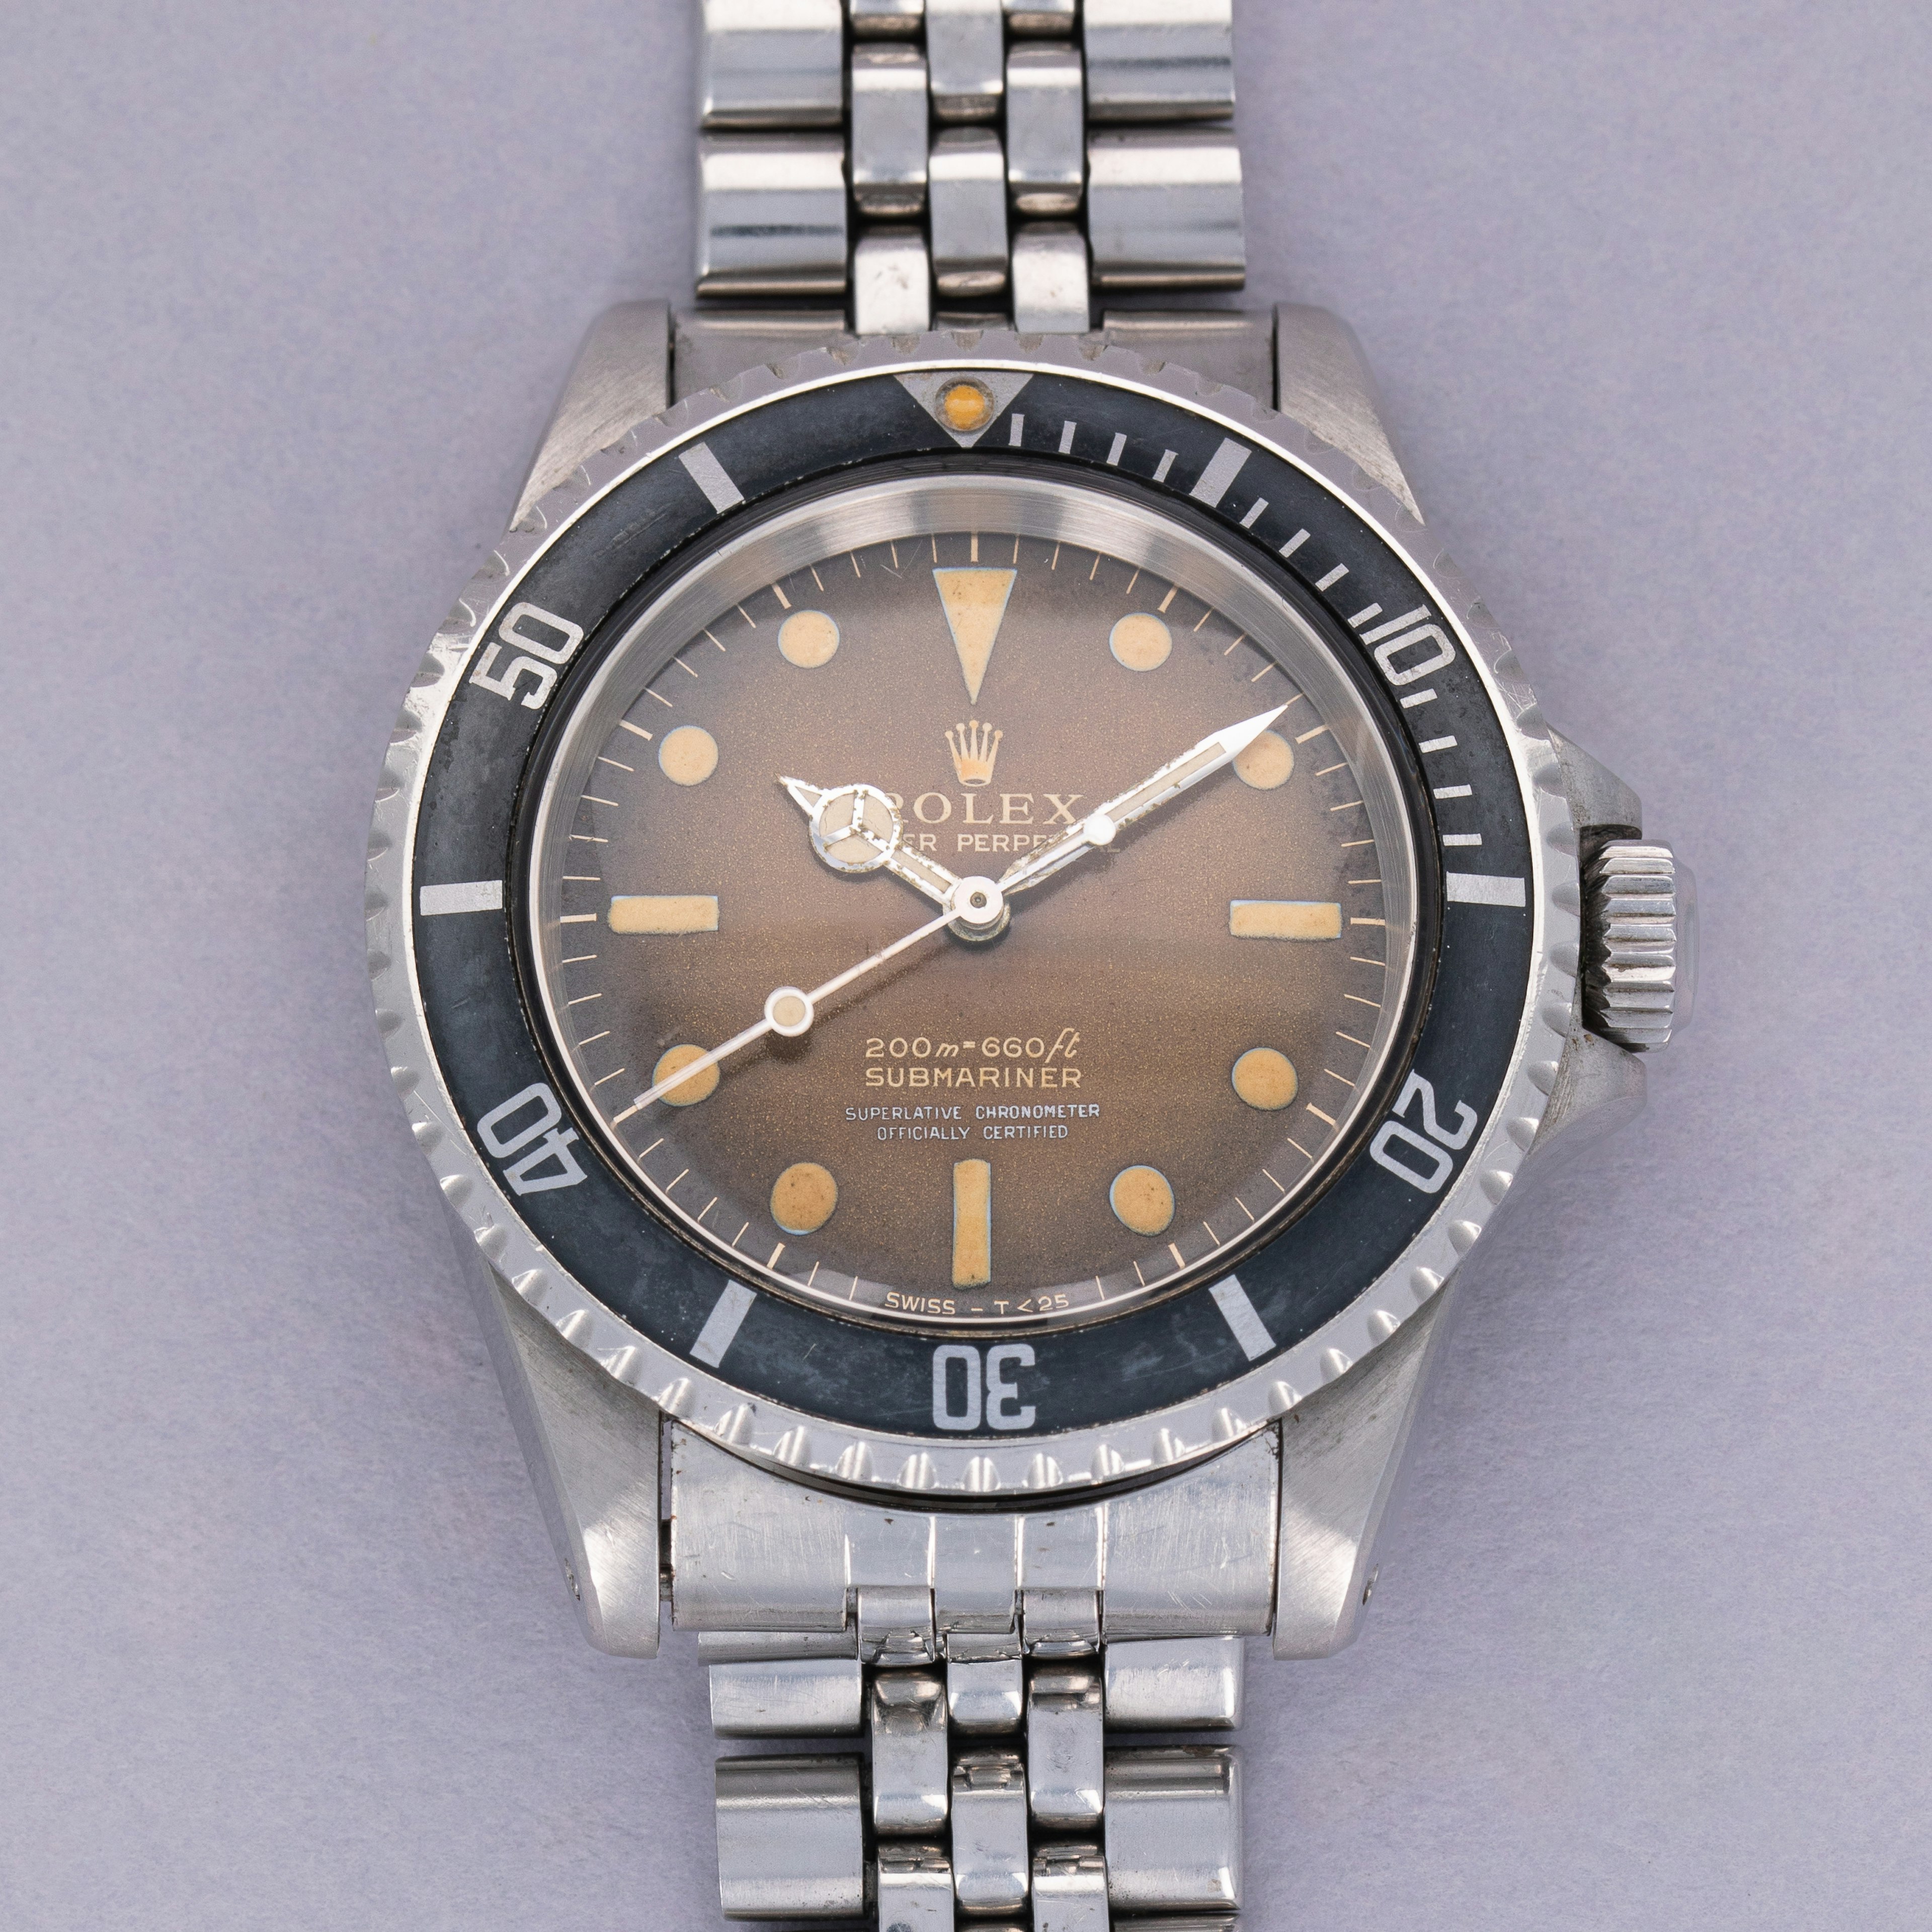 Thumbnail for Rolex Submariner 5512 Gilt Tropical Dial Box and Papers